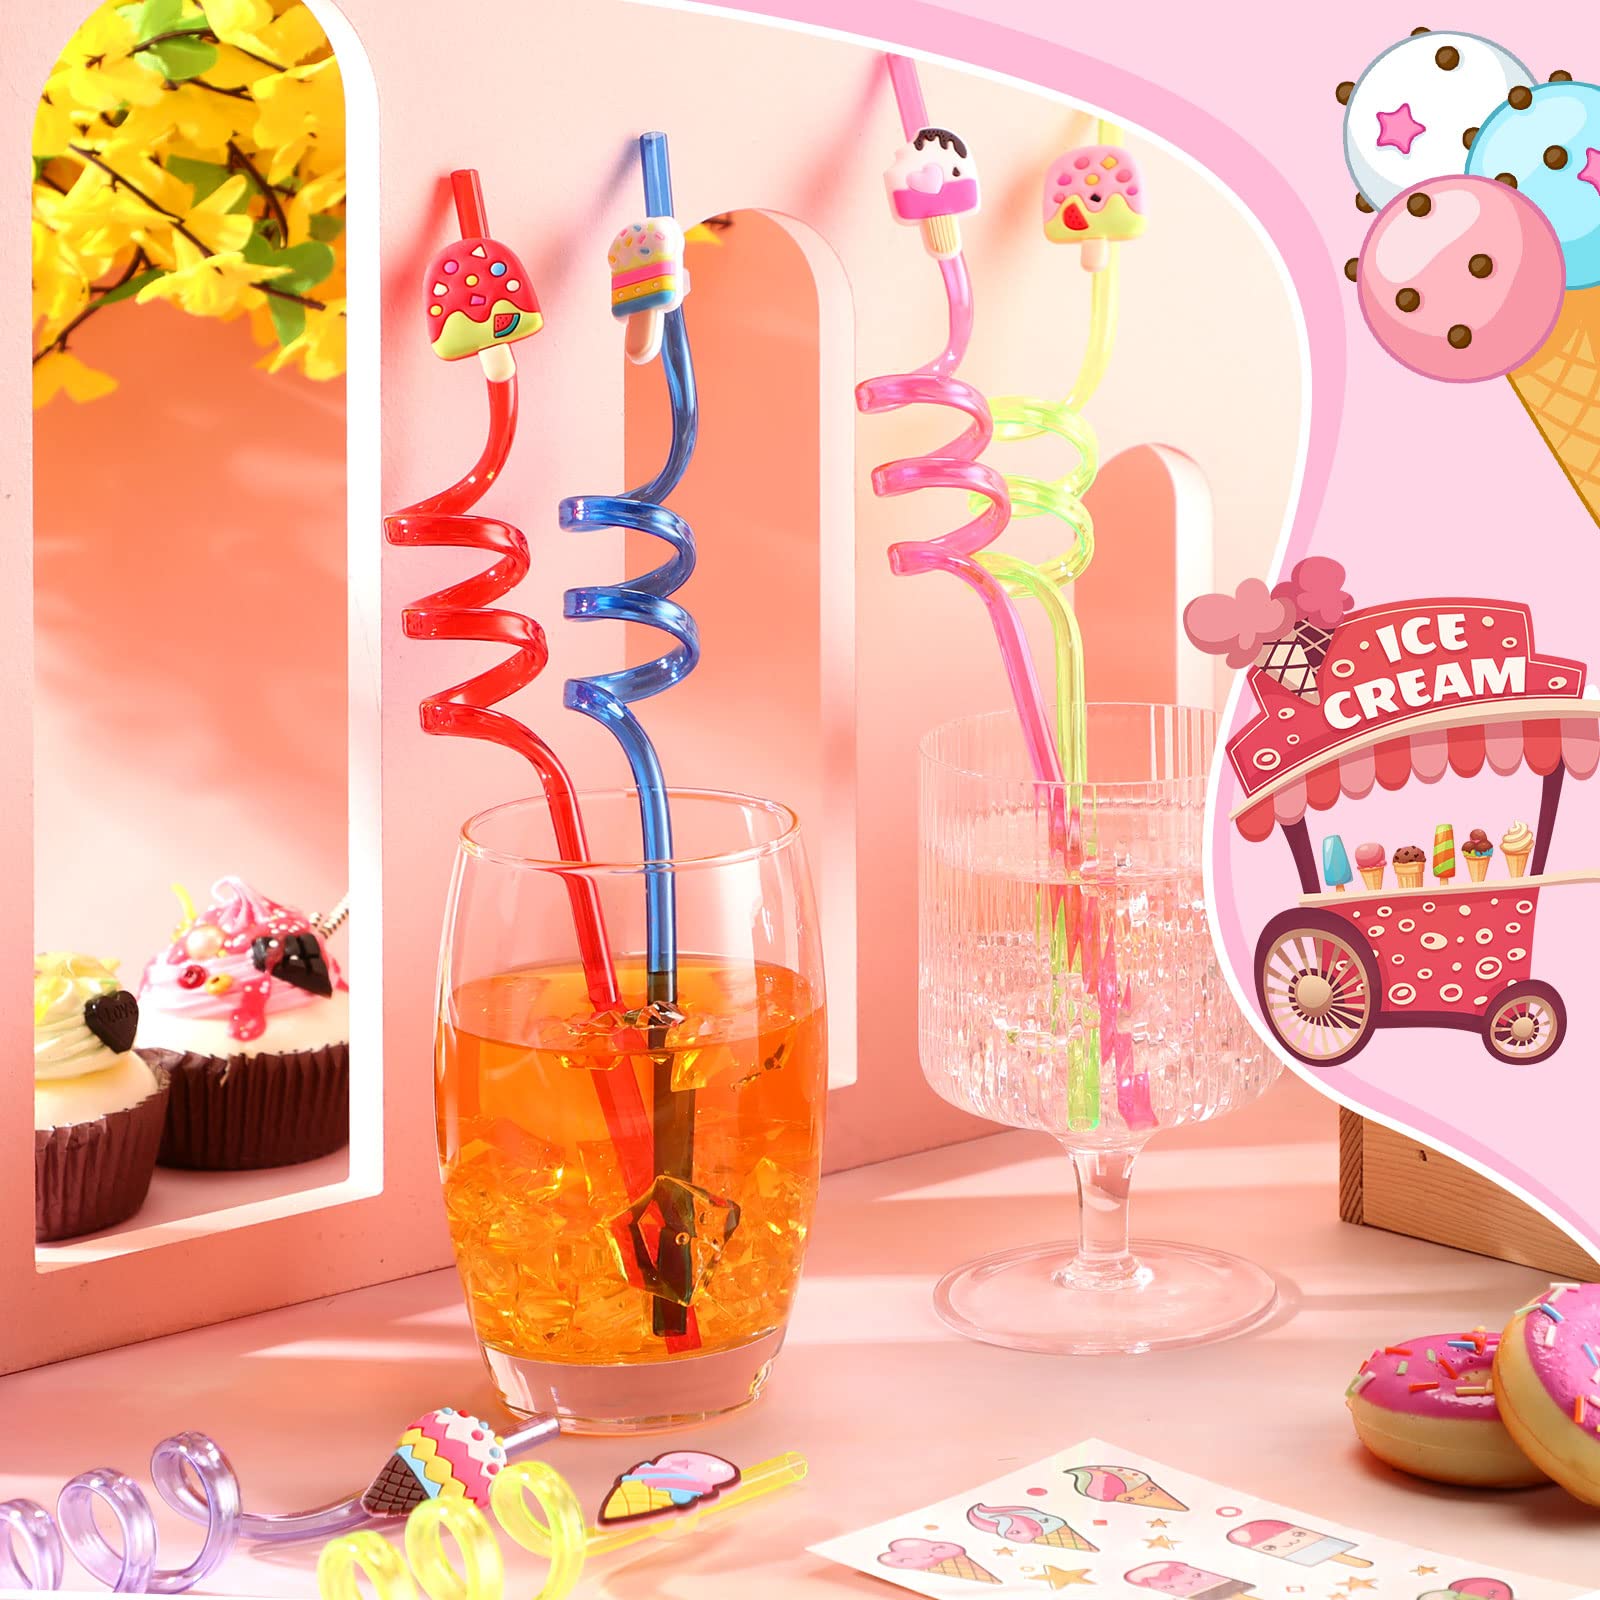 43 Pieces Ice Cream Straws and Cleaning Brushes Ice Cream Drinking Straws Goodie Gifts Ice Cream Tattoos Sticker Reusable Ice Cream Straws for Kids Birthday Summer Party Favors